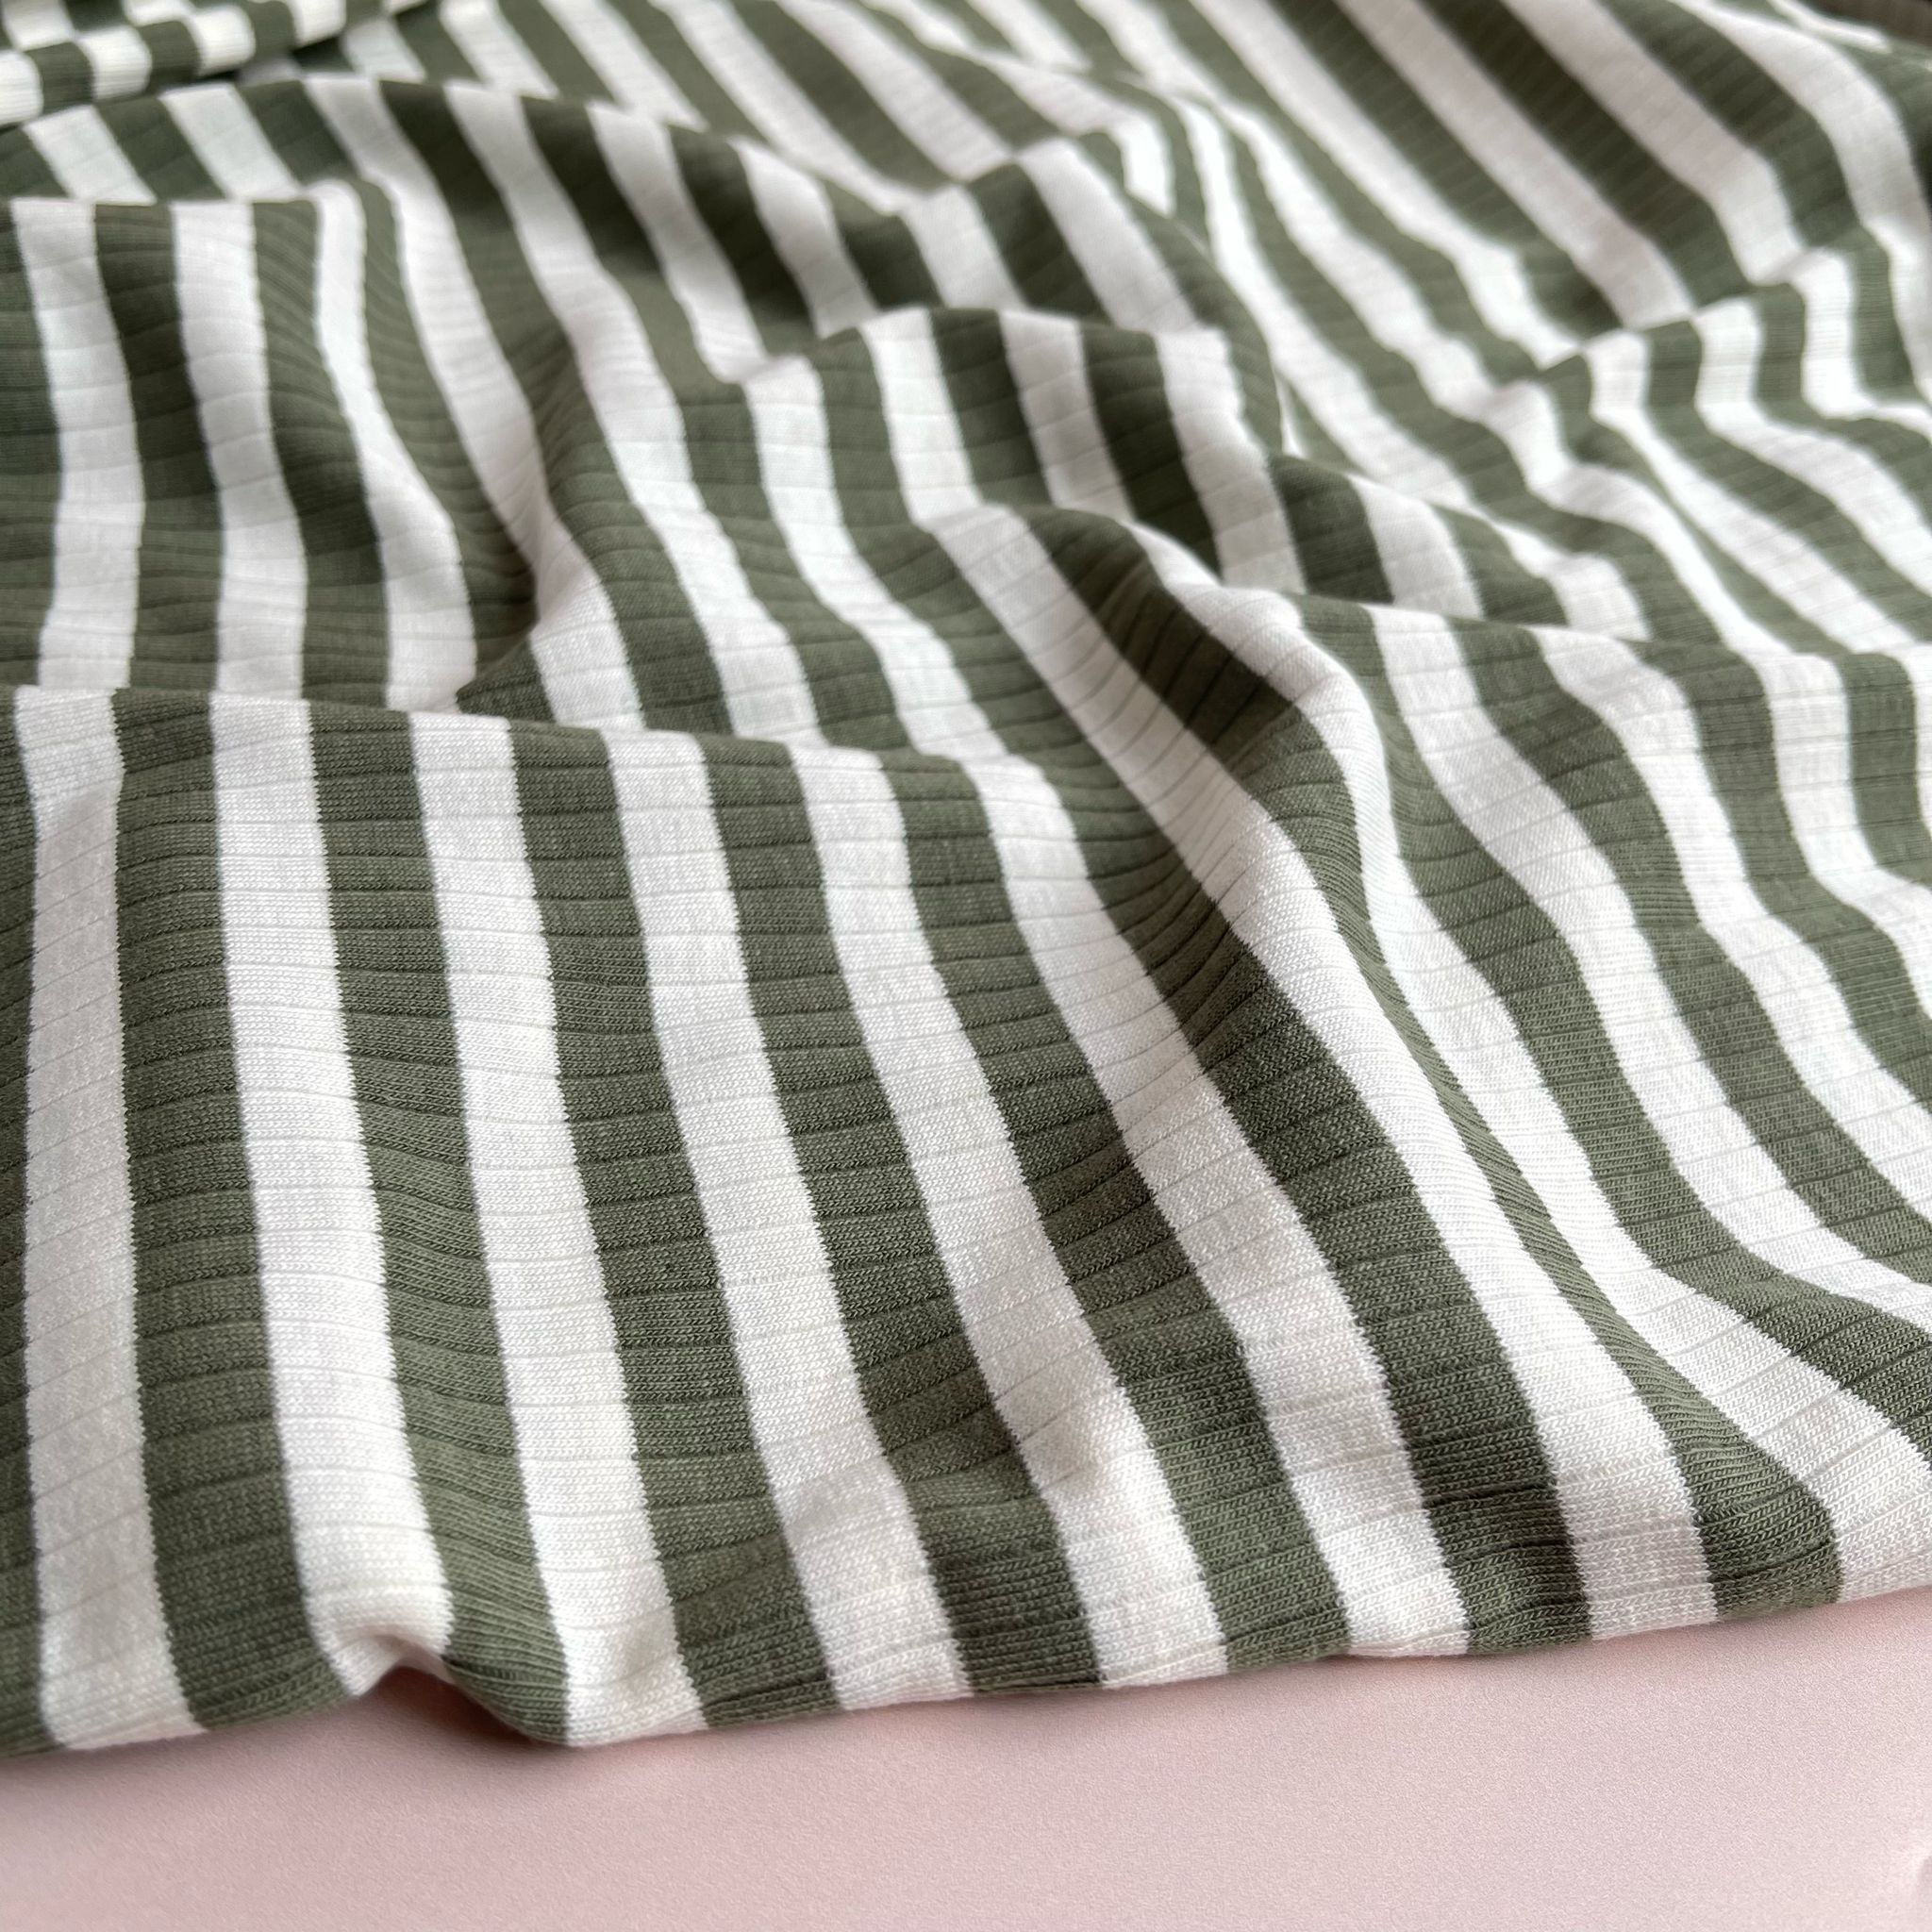 Yarn Dyed Striped Cotton Ribbed Jersey in Khaki and White